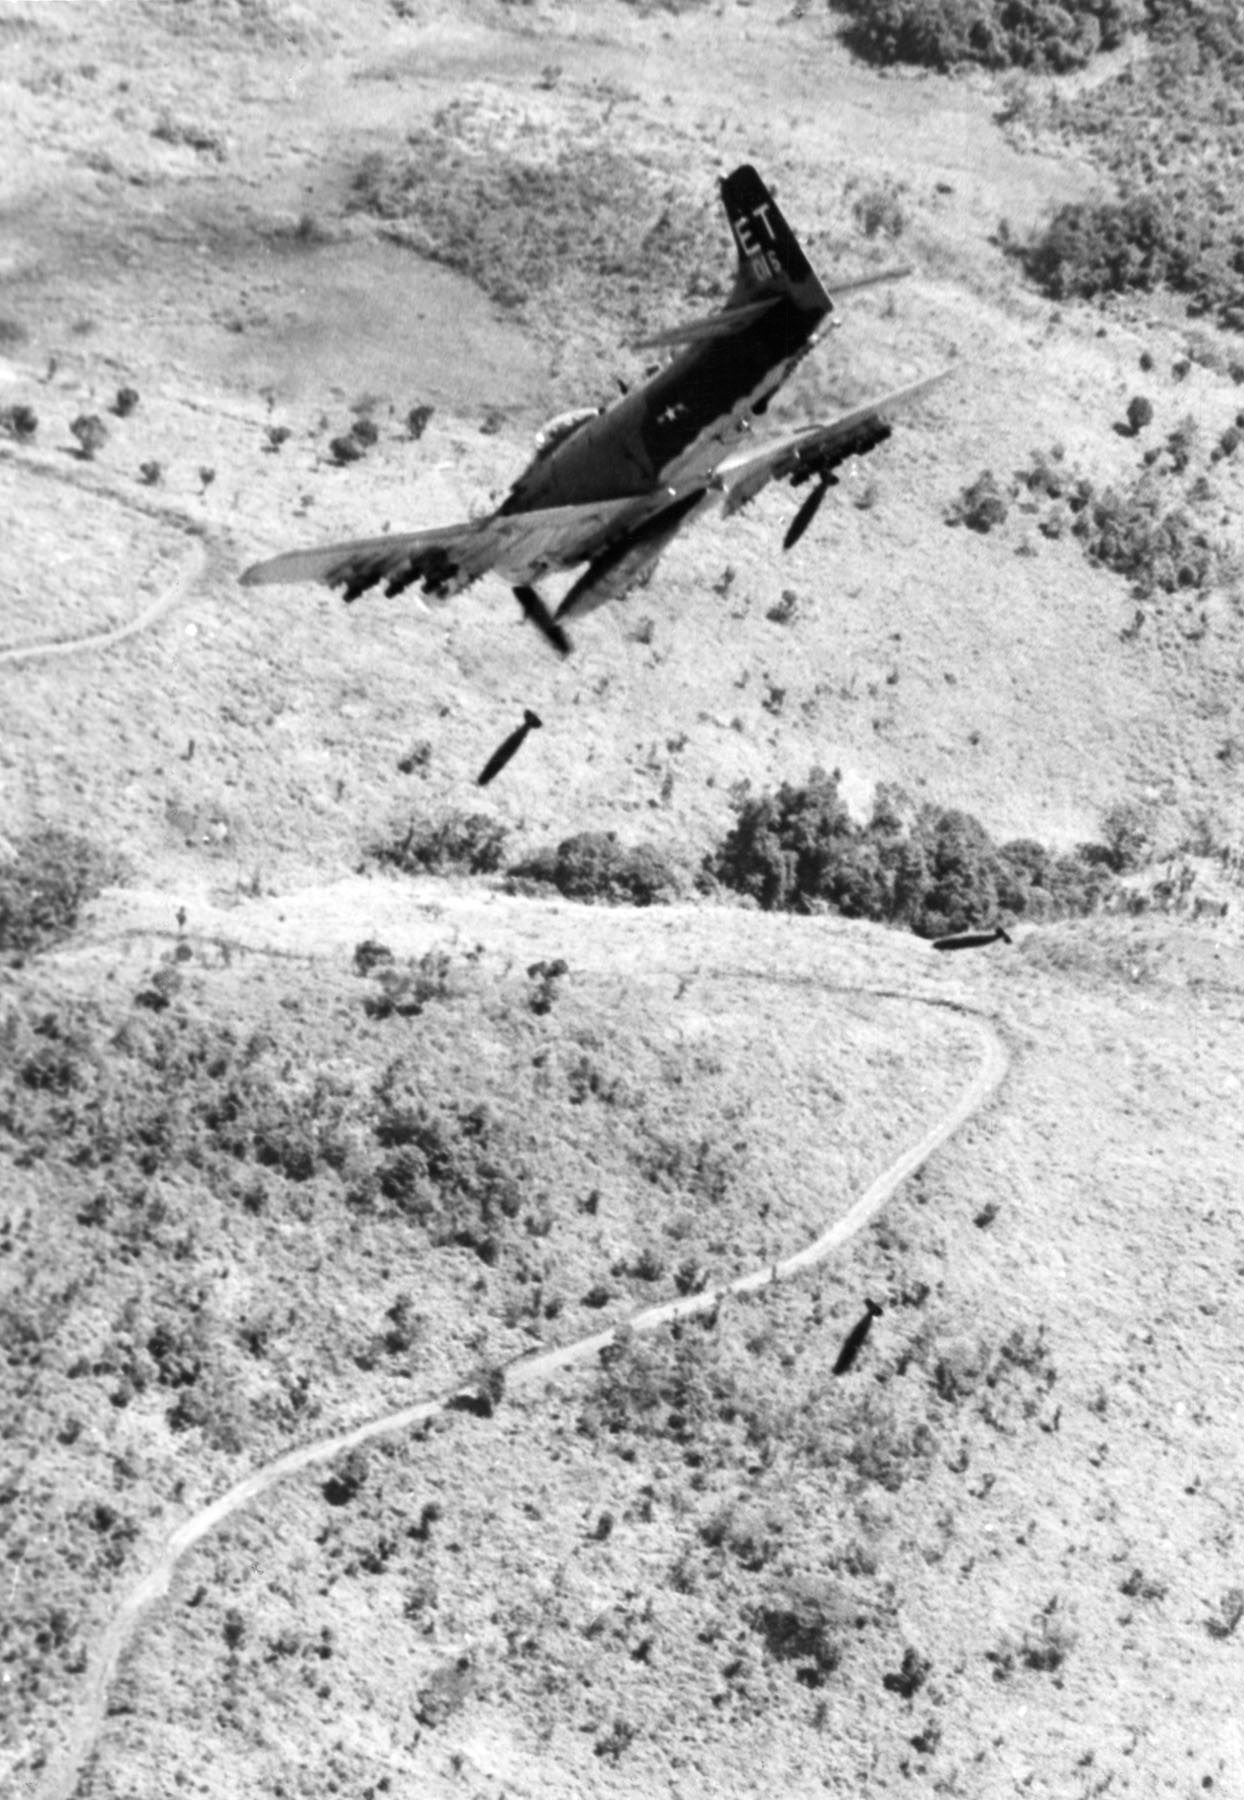 A Douglas A-1H Skyraider of the 6th Special Operations Squadron dive bombing a target during a close air support mission, Vietnam, 1968. (U.S. Air Force)